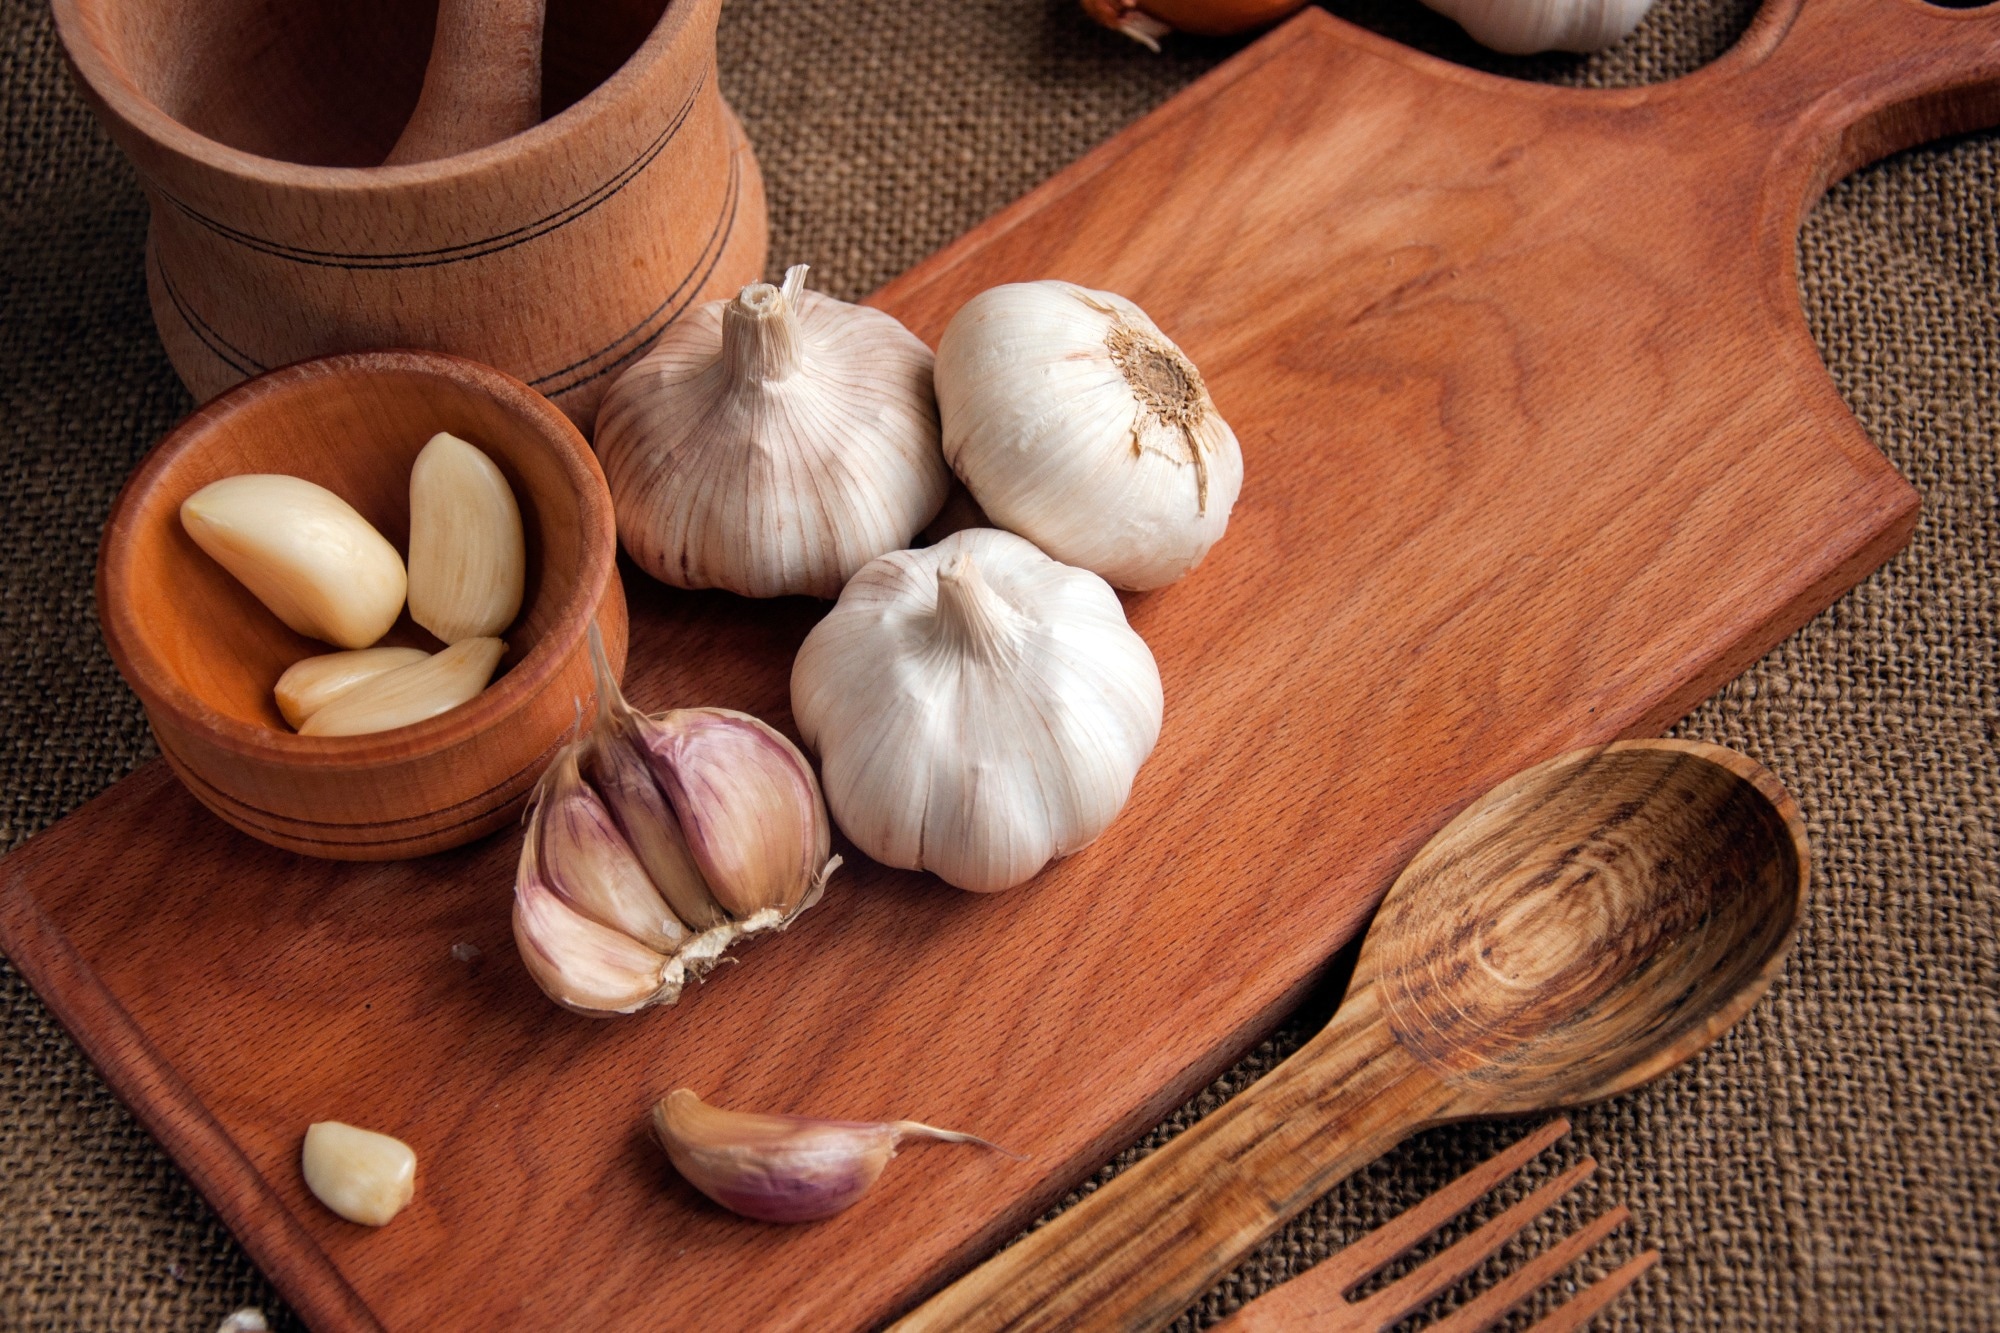 Study: Garlic consumption in relation to colorectal cancer risk and to alterations of blood bacterial DNA. Image Credit: Volodymyr Plysiuk / Shutterstock.com